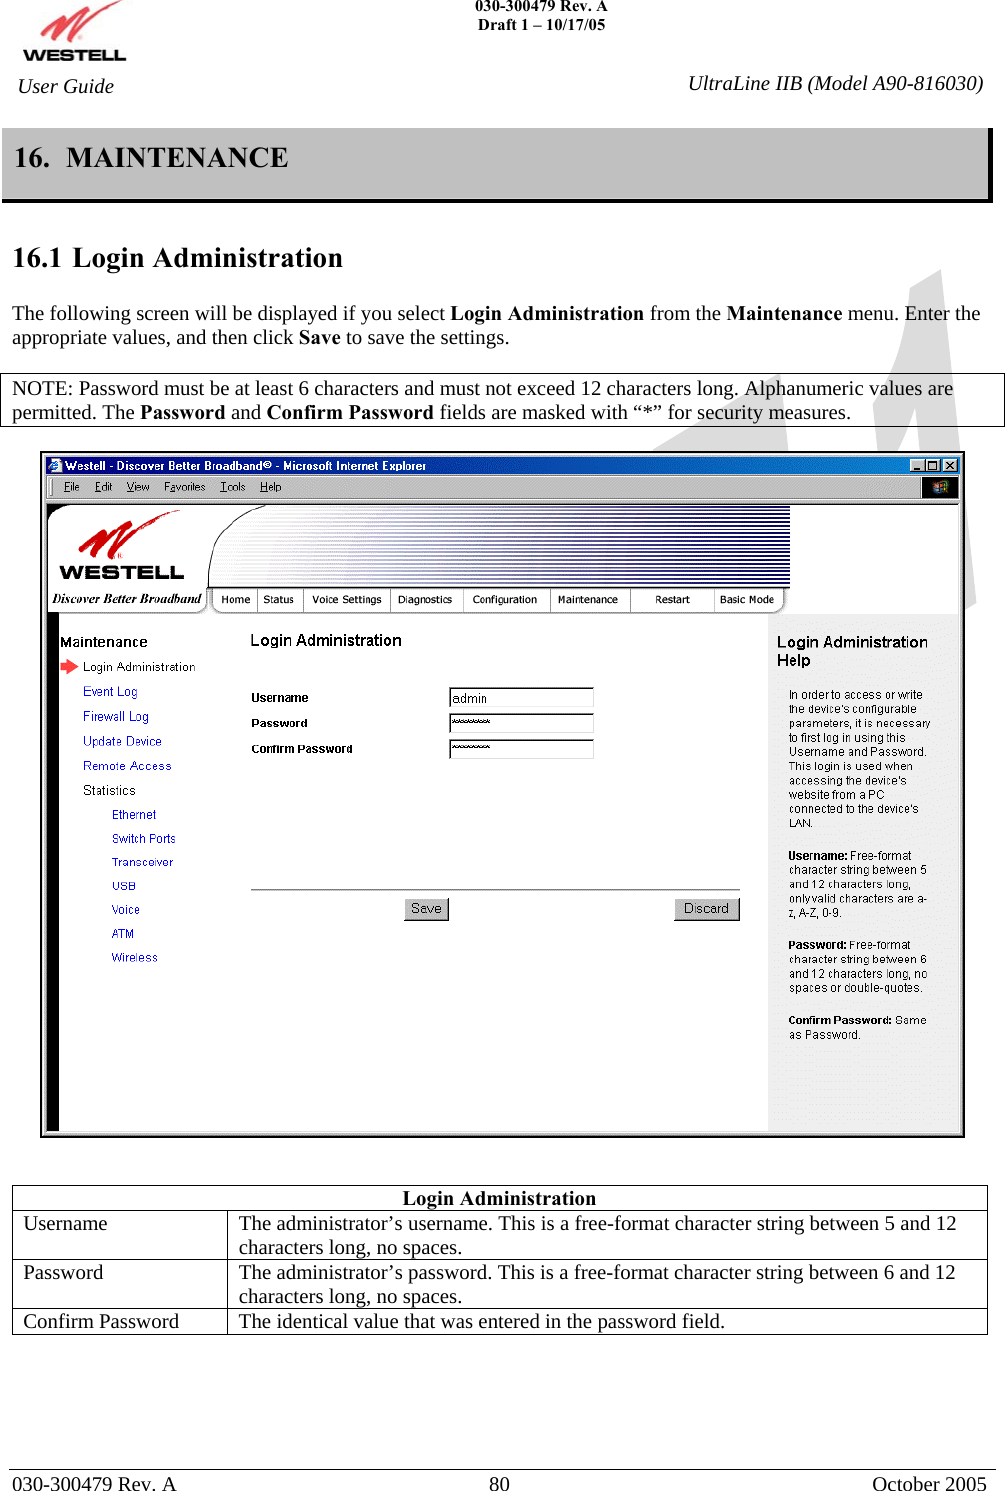    030-300479 Rev. A Draft 1 – 10/17/05   030-300479 Rev. A  80  October 2005  User Guide  UltraLine IIB (Model A90-816030)16.  MAINTENANCE  16.1 Login Administration  The following screen will be displayed if you select Login Administration from the Maintenance menu. Enter the appropriate values, and then click Save to save the settings.  NOTE: Password must be at least 6 characters and must not exceed 12 characters long. Alphanumeric values are permitted. The Password and Confirm Password fields are masked with “*” for security measures.     Login Administration Username  The administrator’s username. This is a free-format character string between 5 and 12 characters long, no spaces. Password  The administrator’s password. This is a free-format character string between 6 and 12 characters long, no spaces. Confirm Password  The identical value that was entered in the password field.      